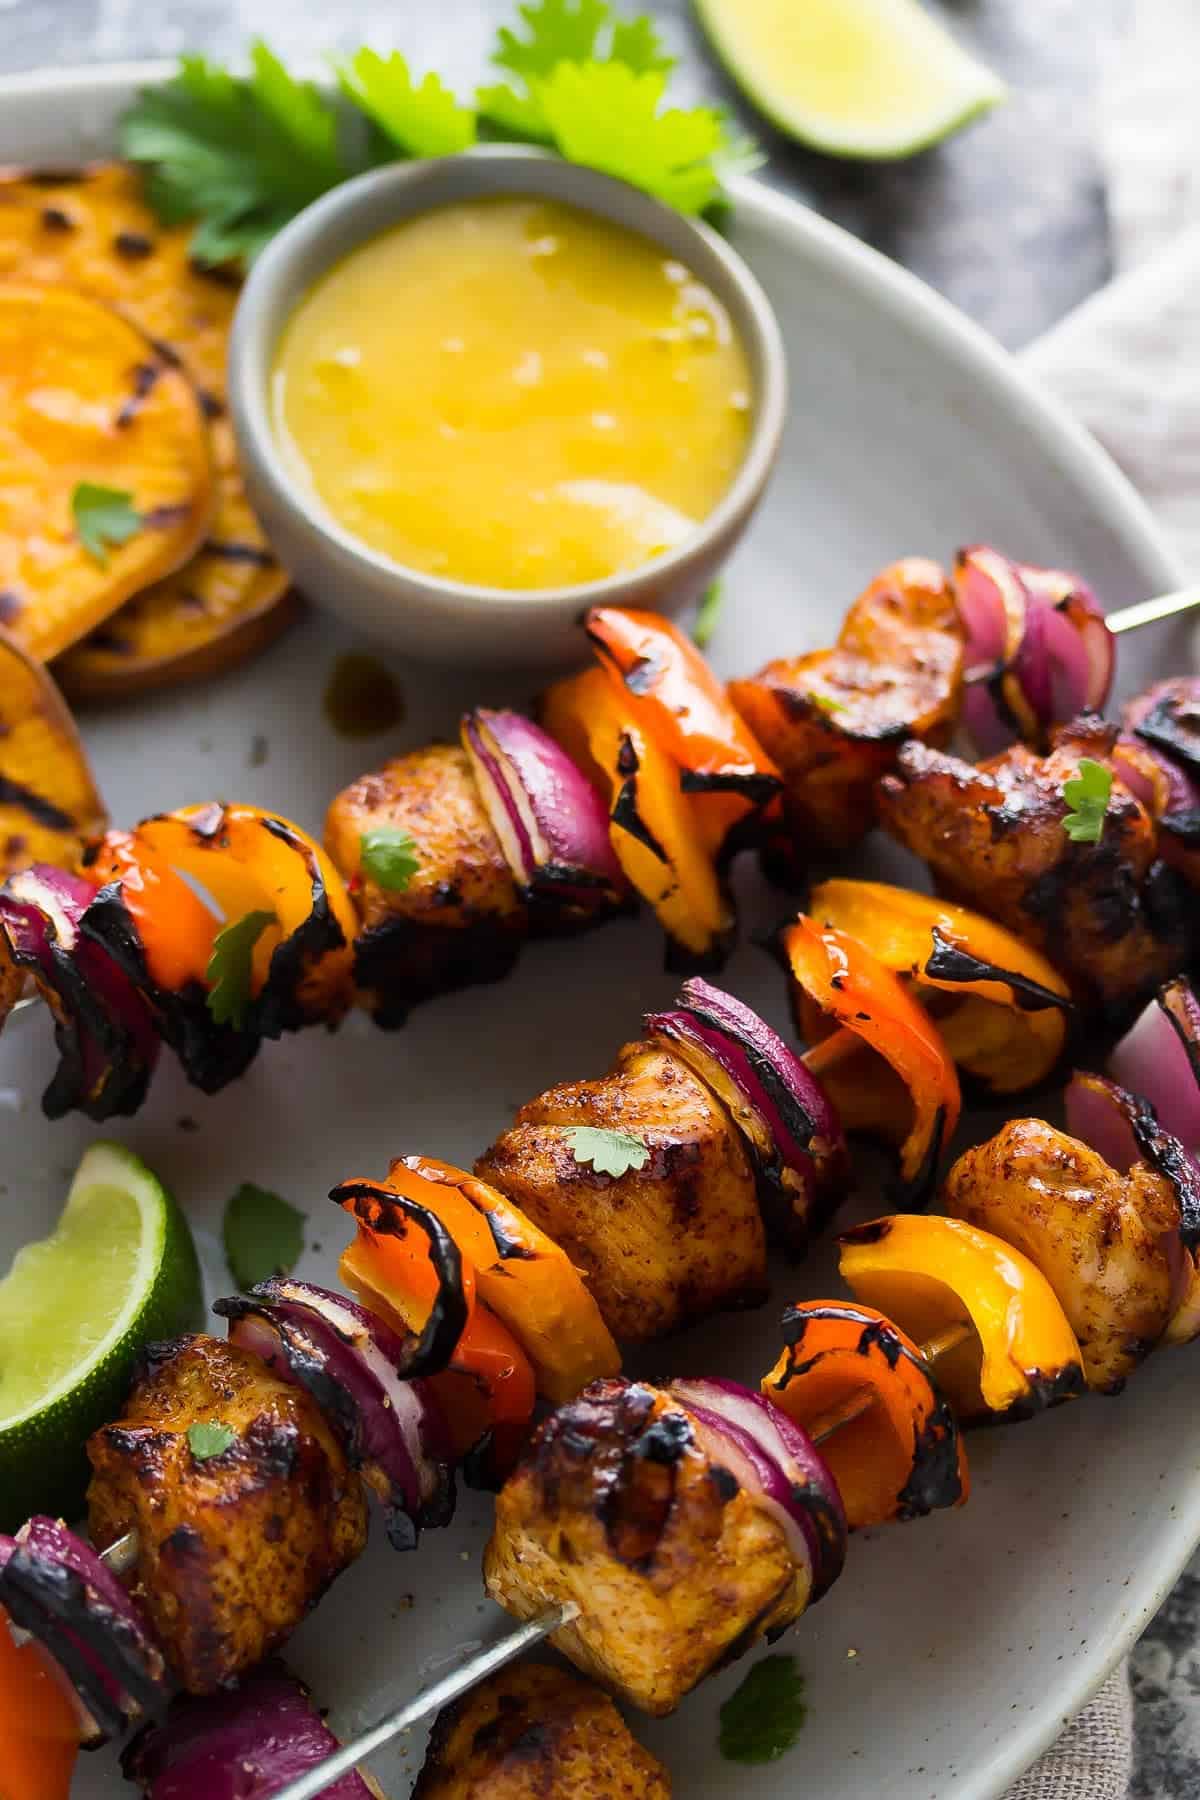 Plated grilled Chili Lime Chicken Skewers with Mango Sauce